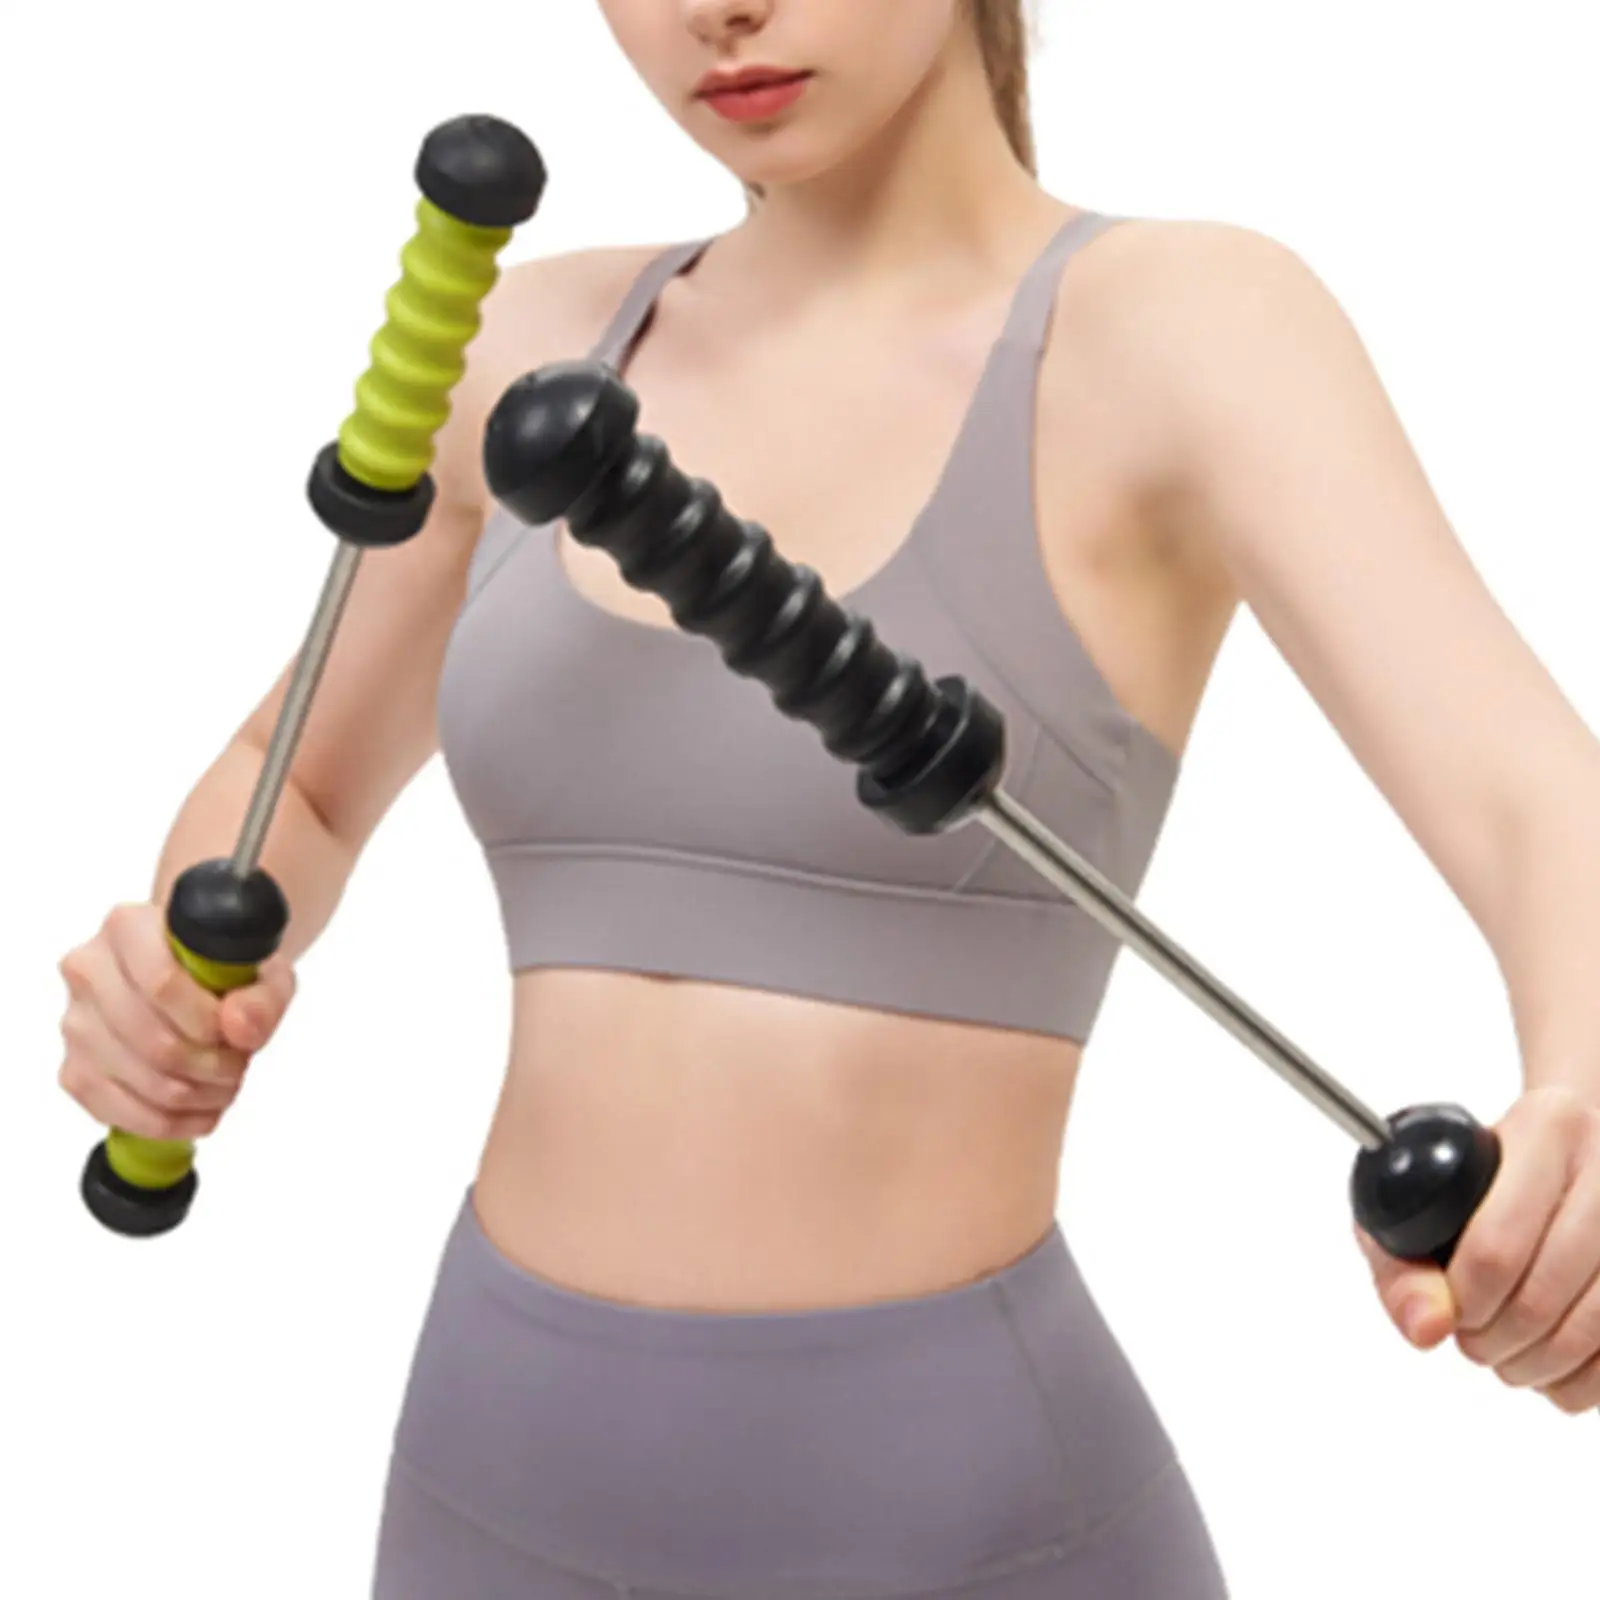 Arm Power Exerciser Muscle Training Resistance Exercise Bands for Muscle